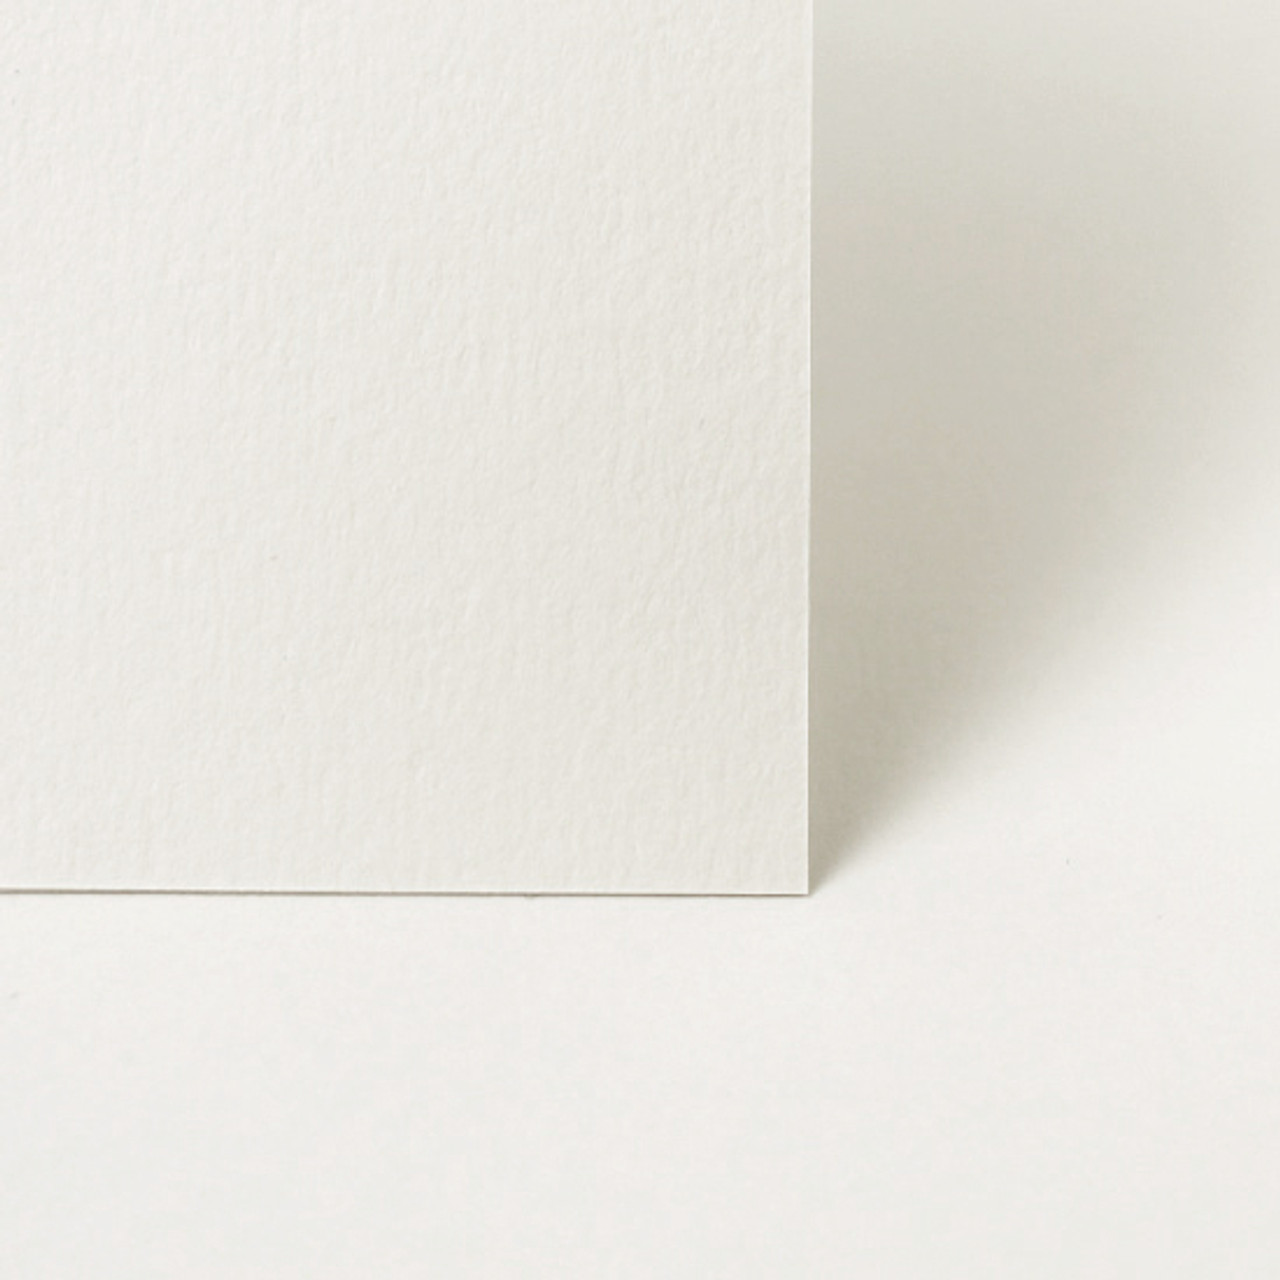 A6 Folding To A7 White Card Blanks, C7 Envelopes-250gsm,300gsm